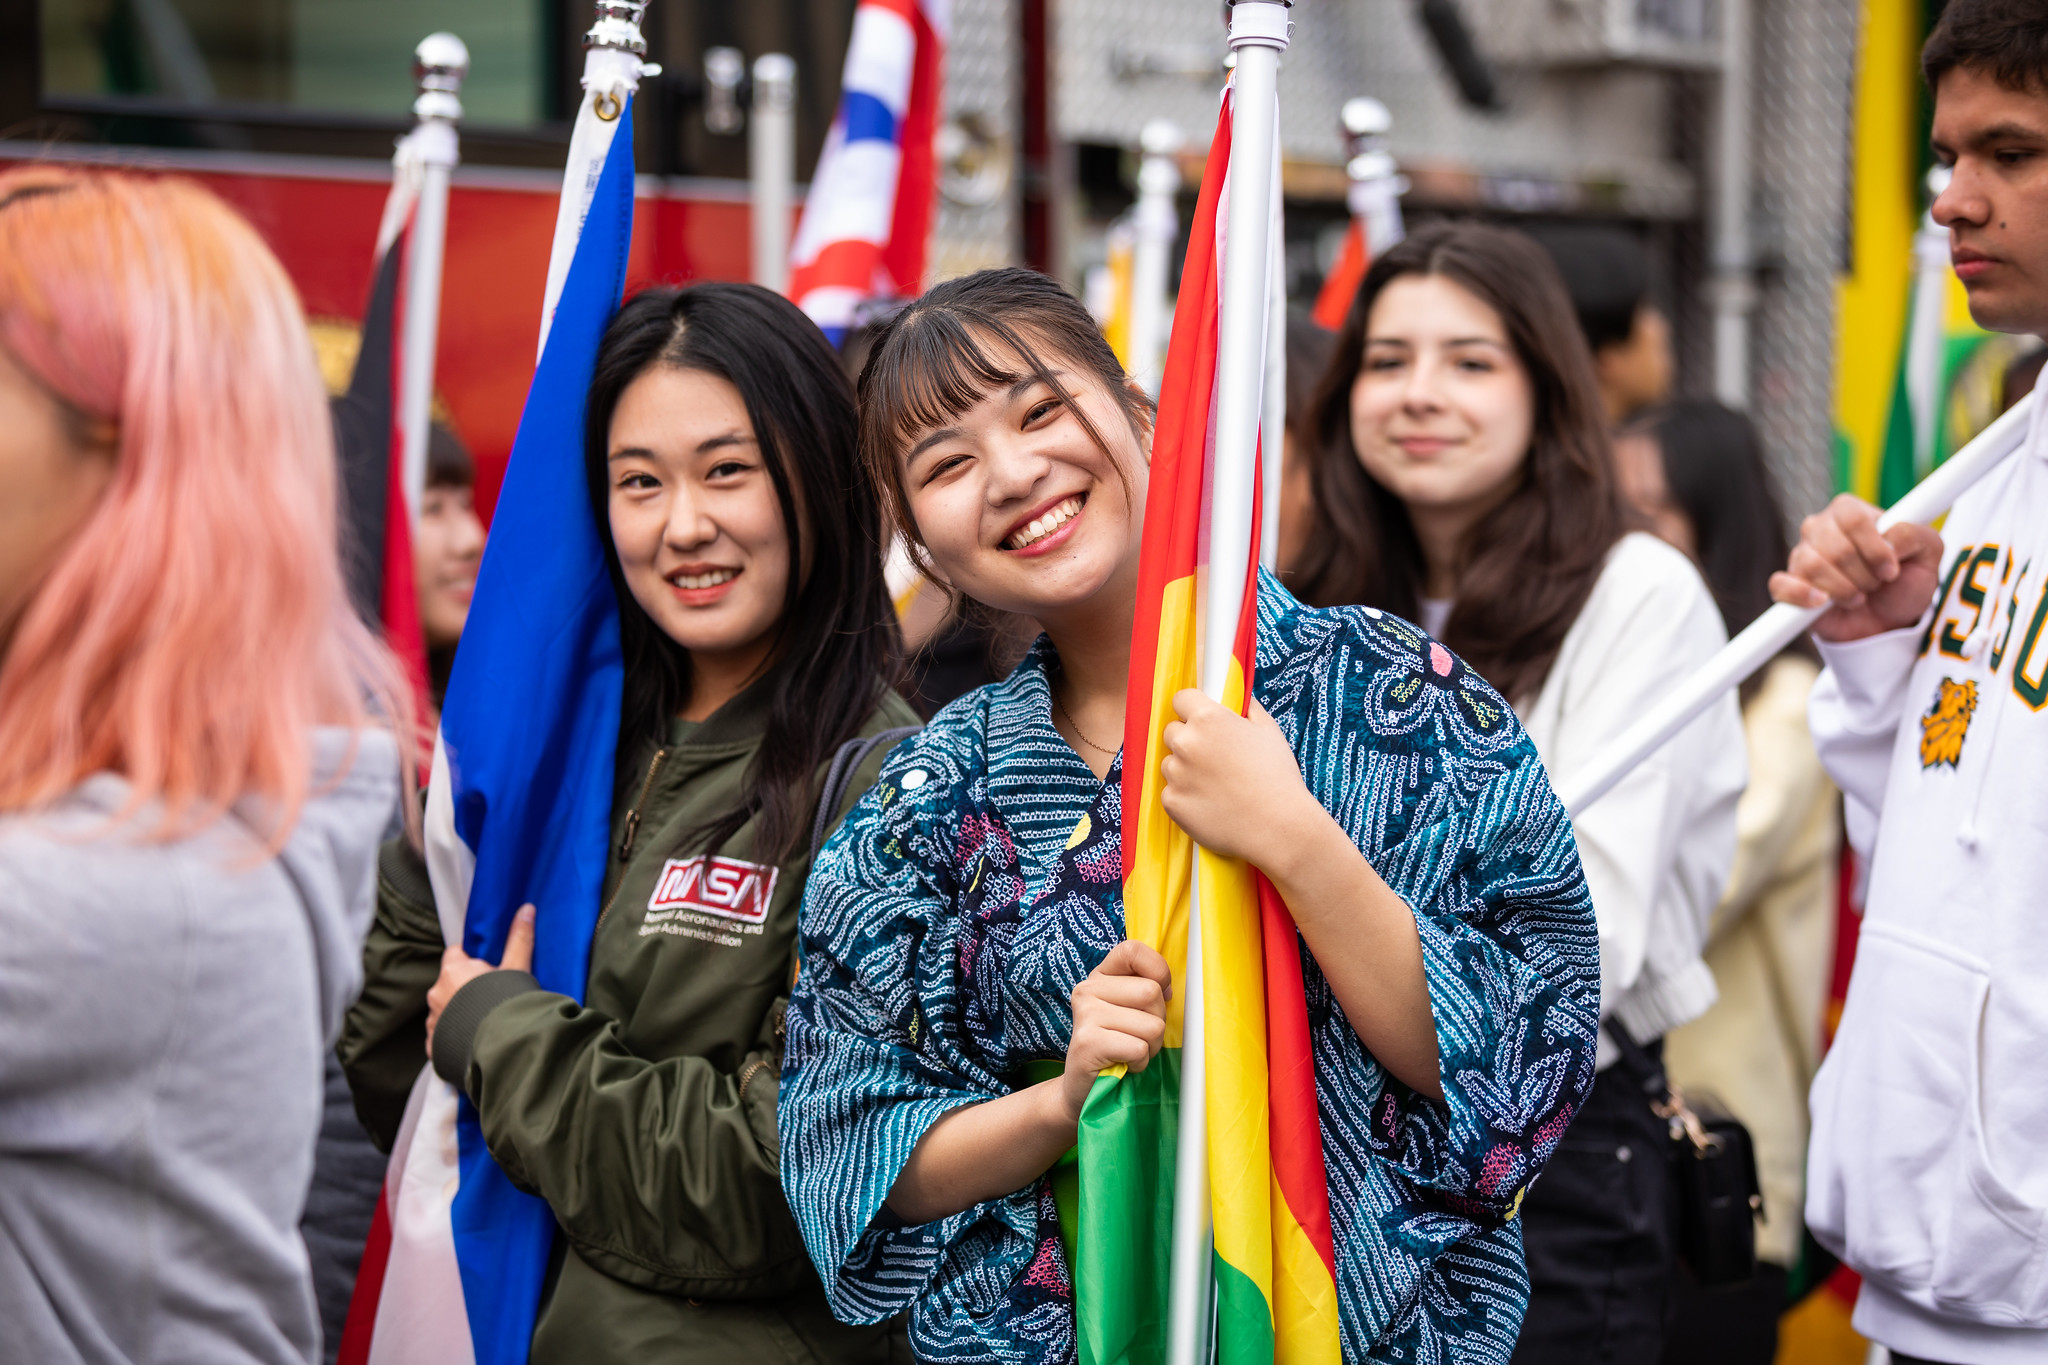 International Students with flags